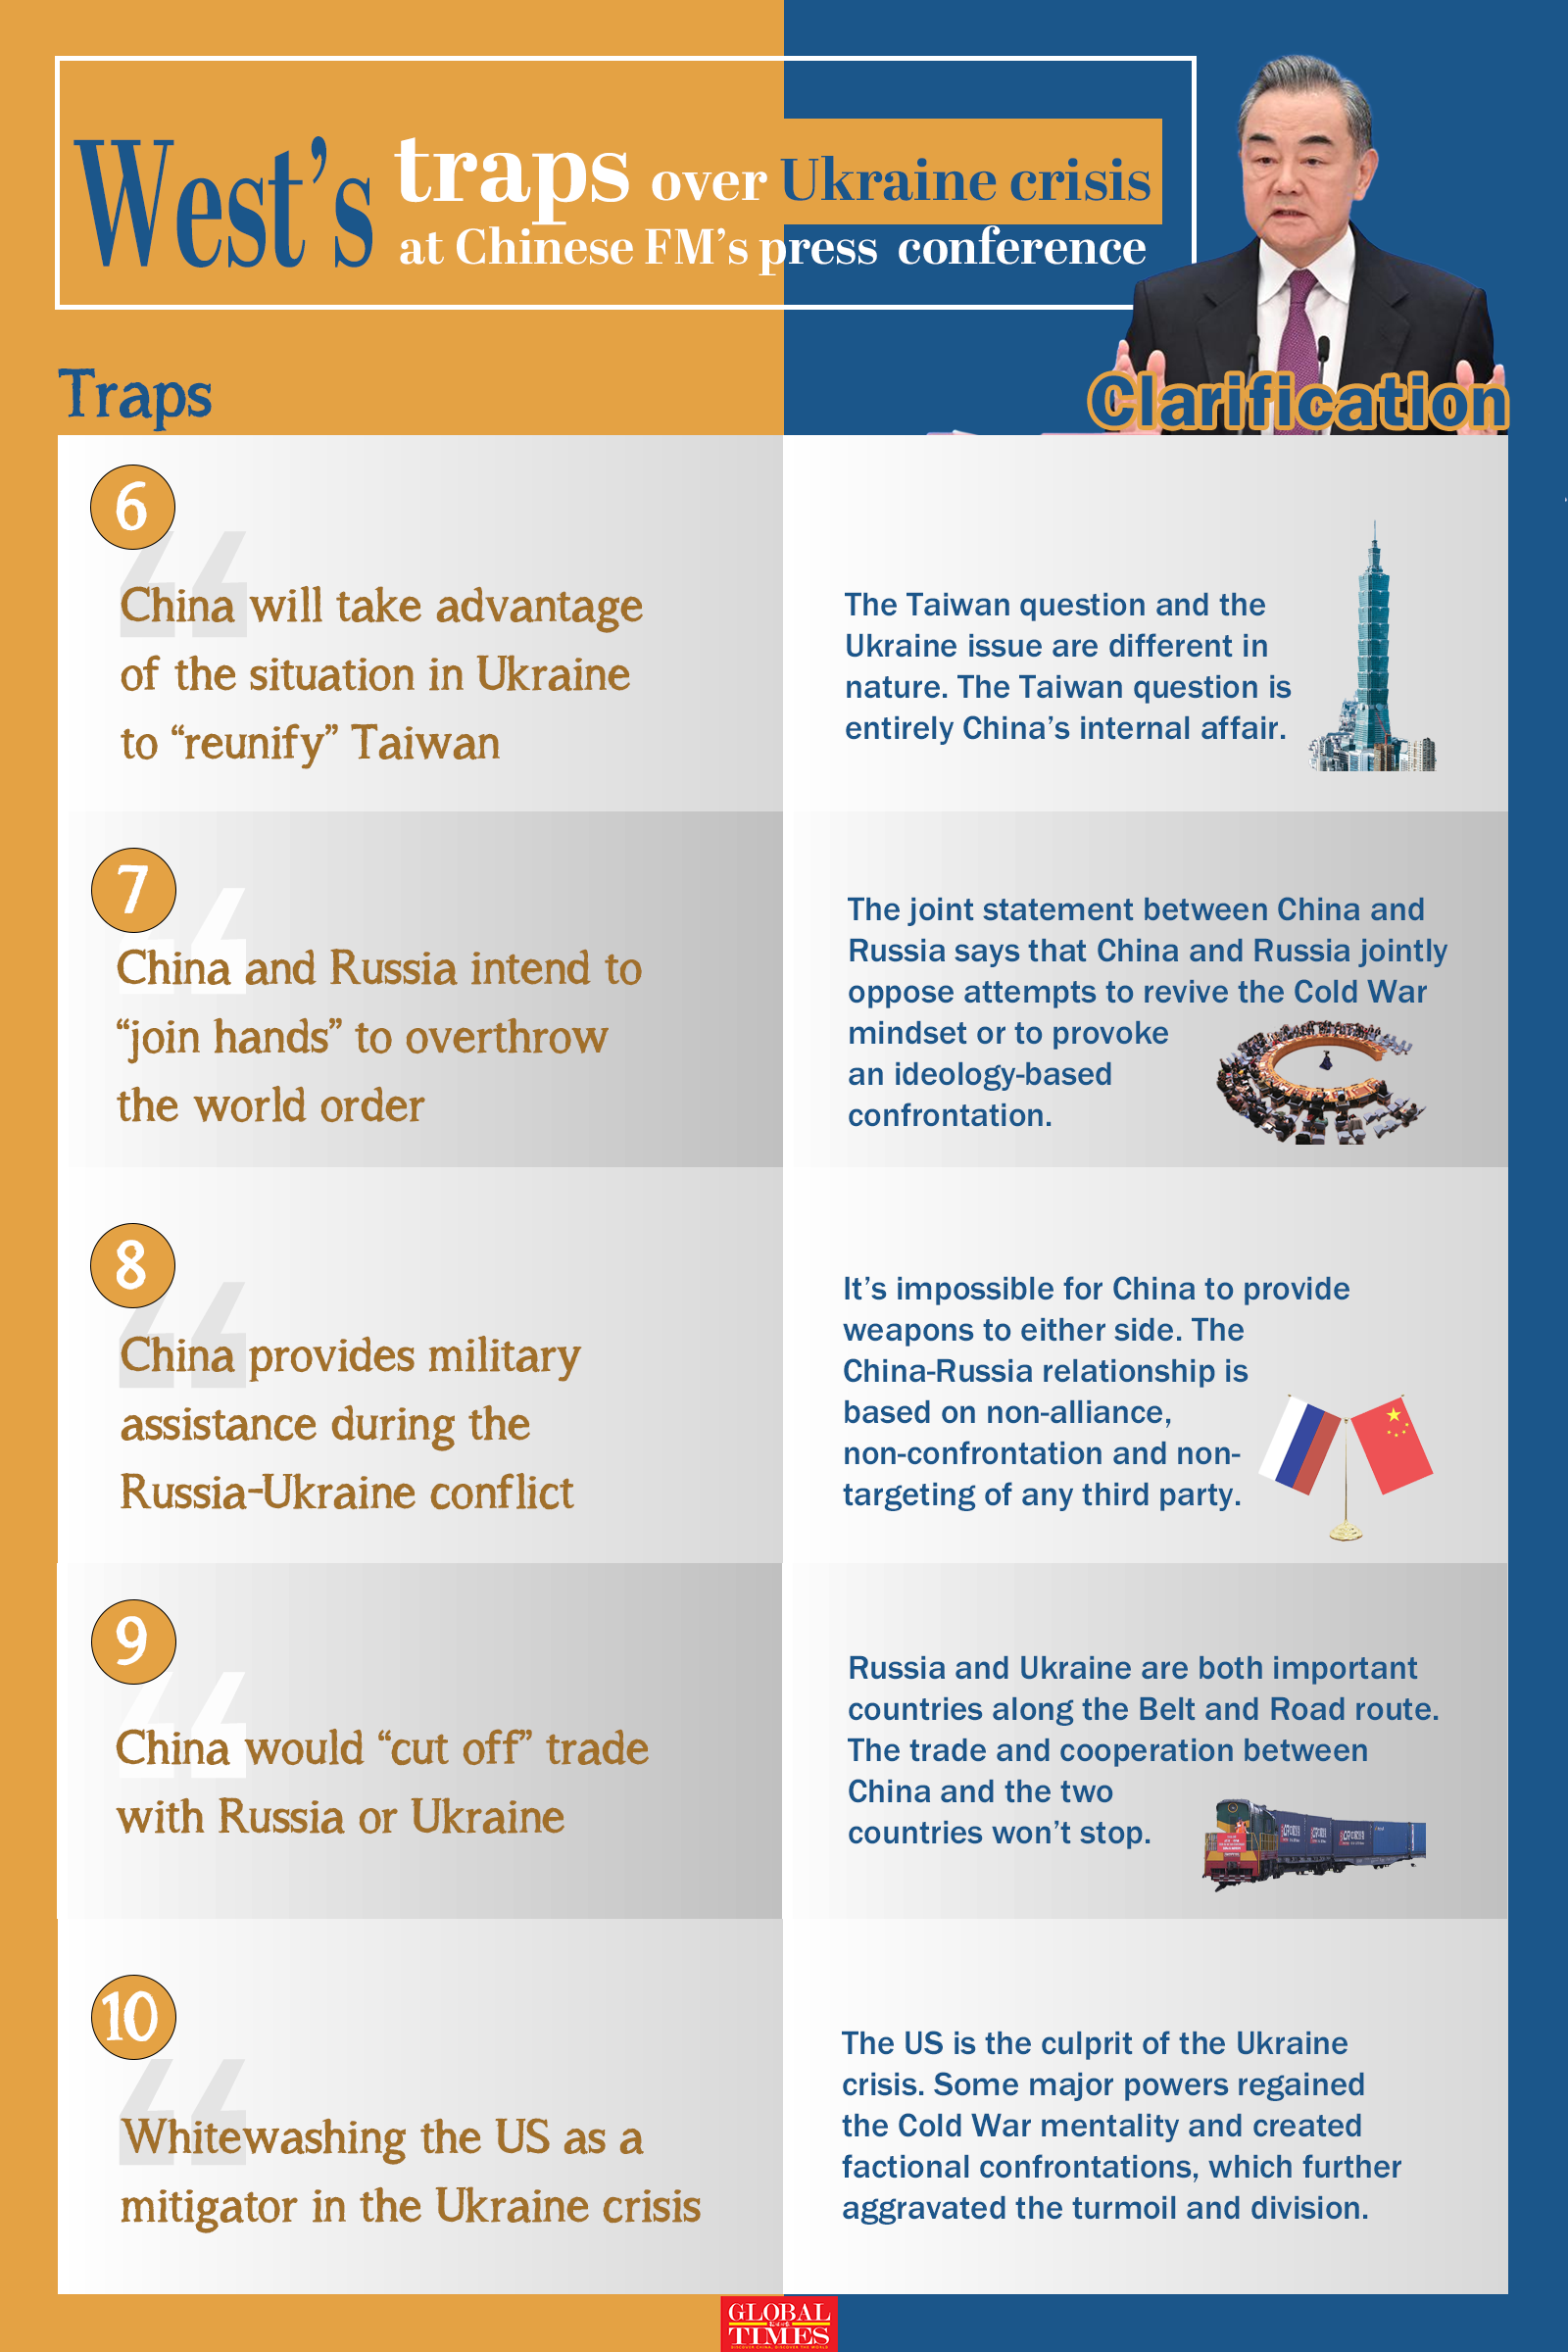 West's ‘discourse traps’over Ukraine crisis at Chinese FM's press conference Graphic: Feng Qingyin/GT